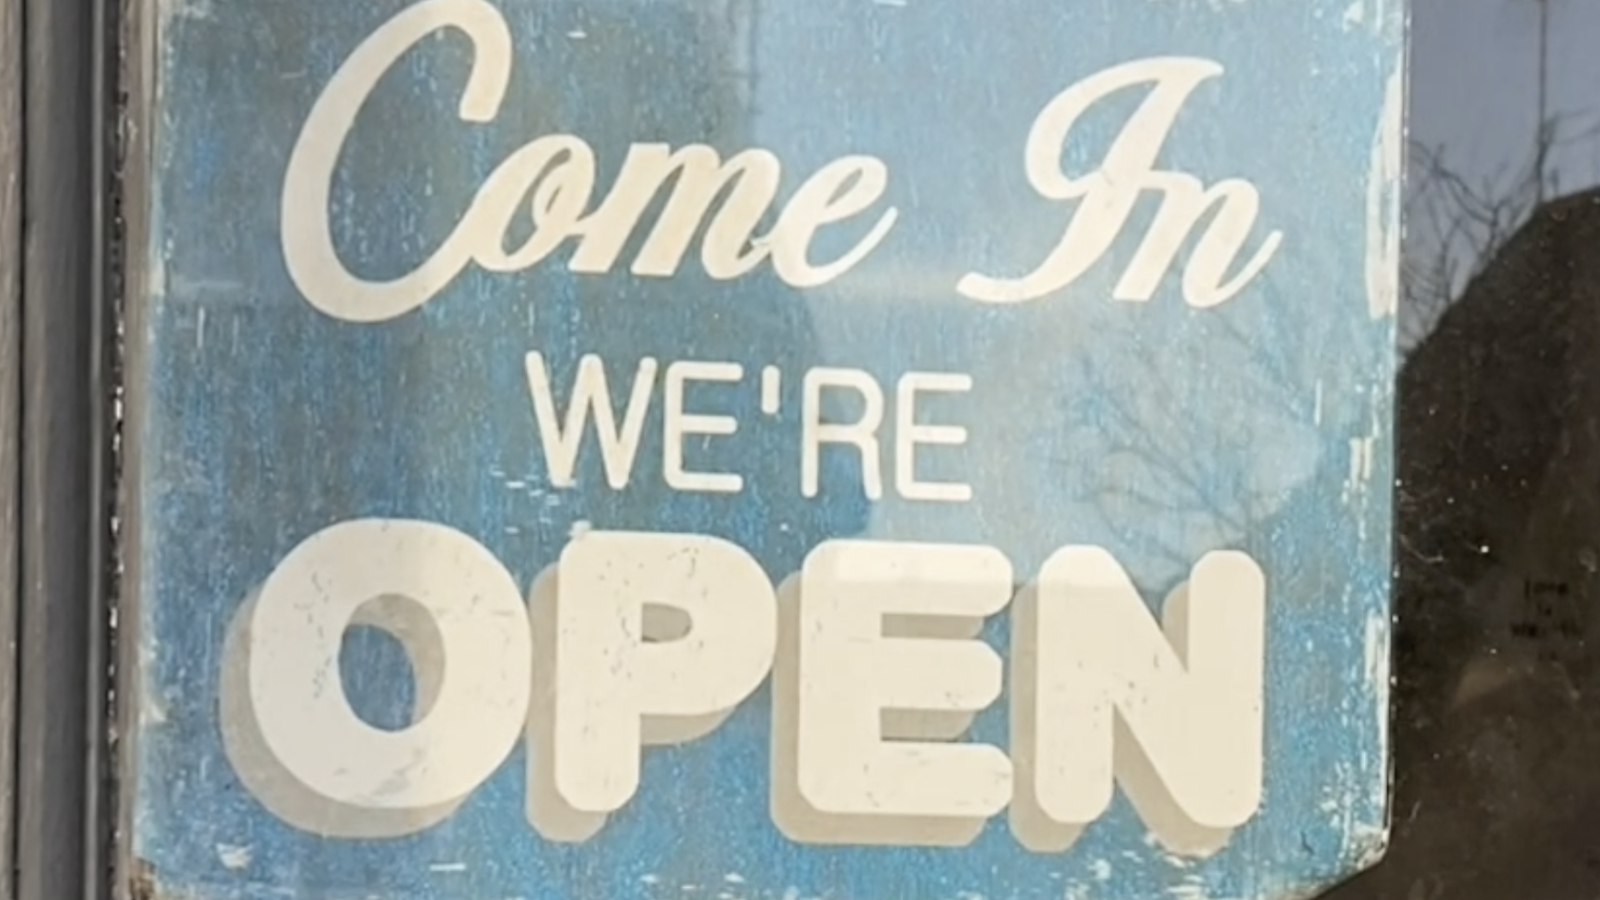 A shop door showing a sign turned to say we are open